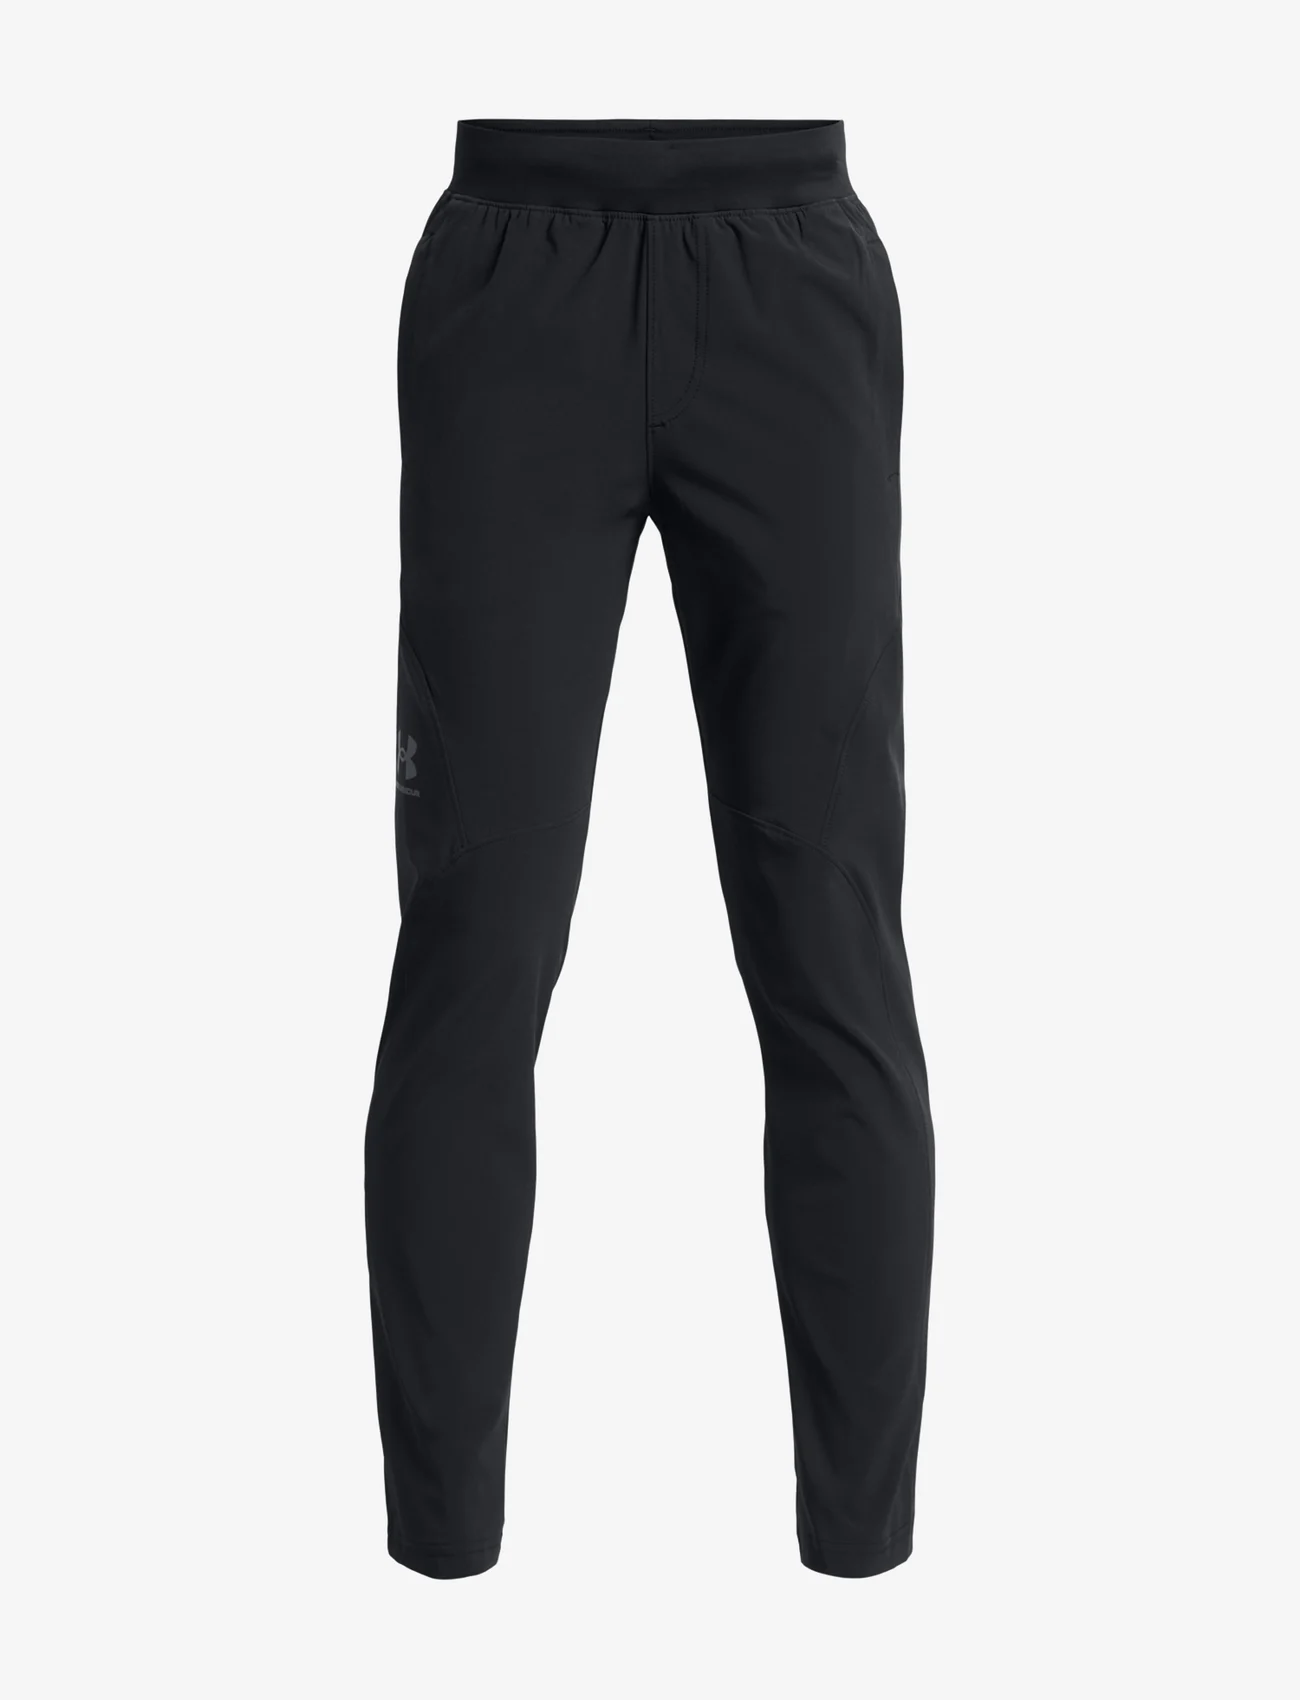 Under Armour - UA Unstoppable Tapered Pant - treenihousut - black - 0